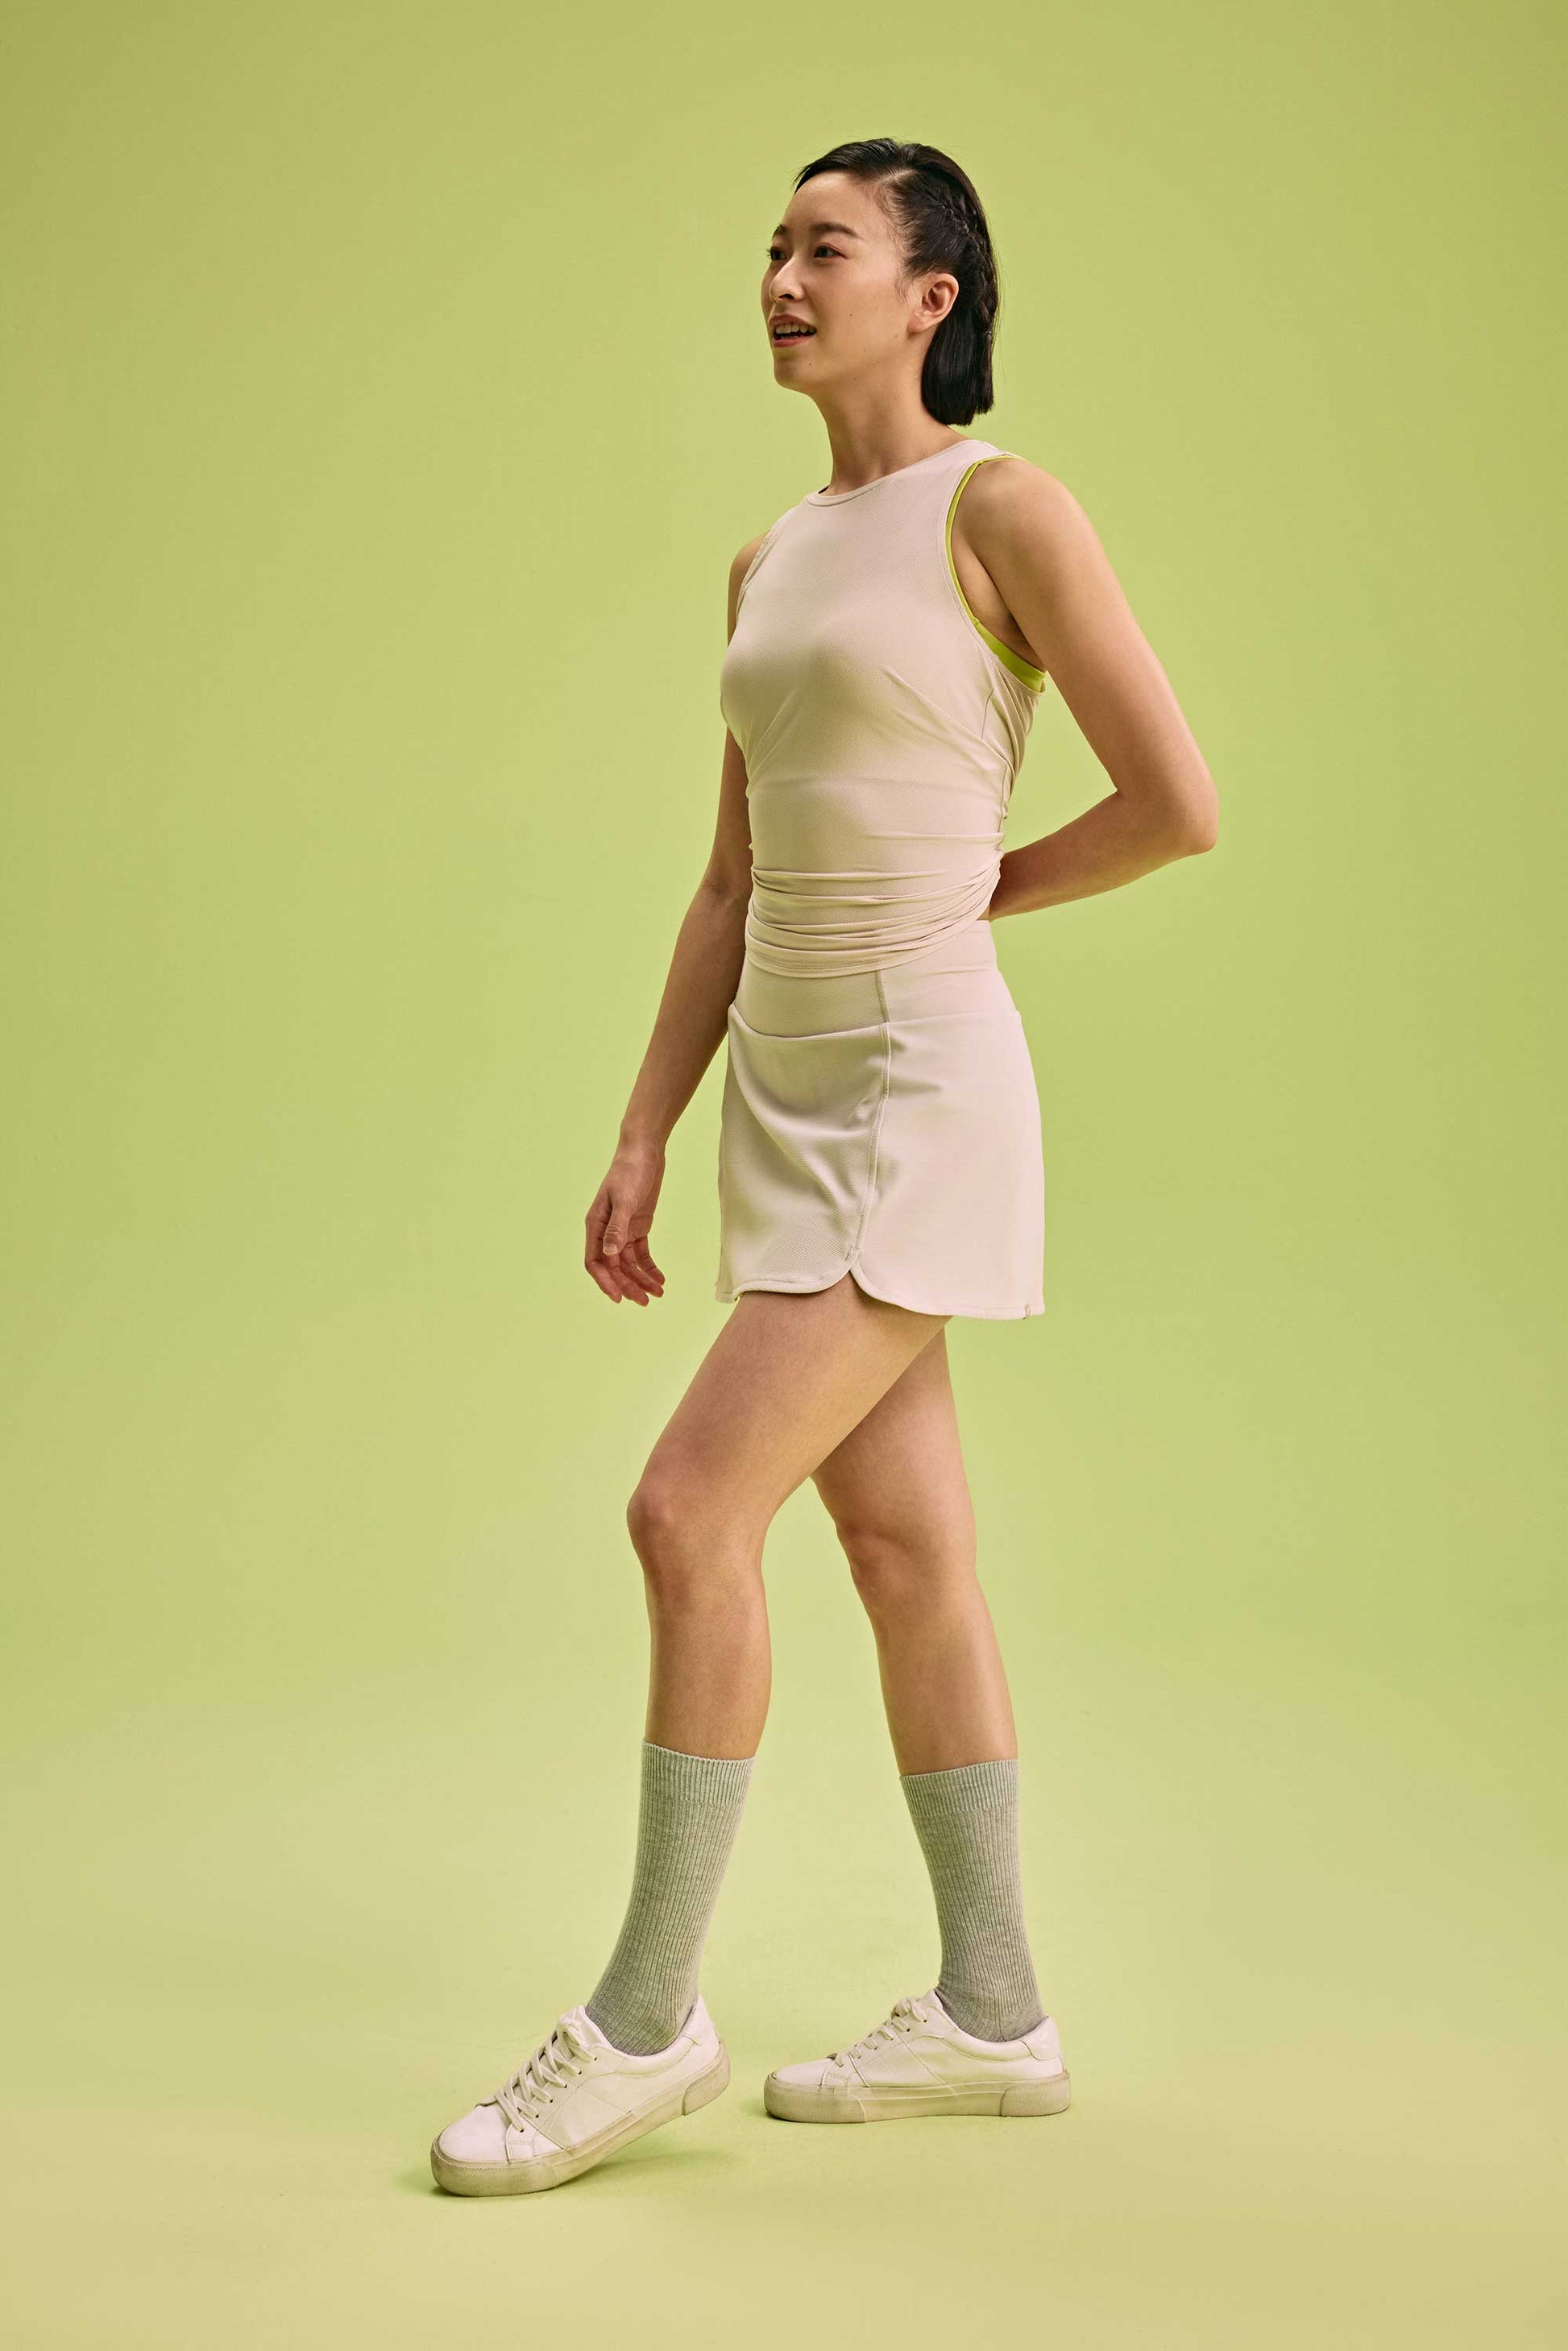 a woman wearing a cream tank and skirt